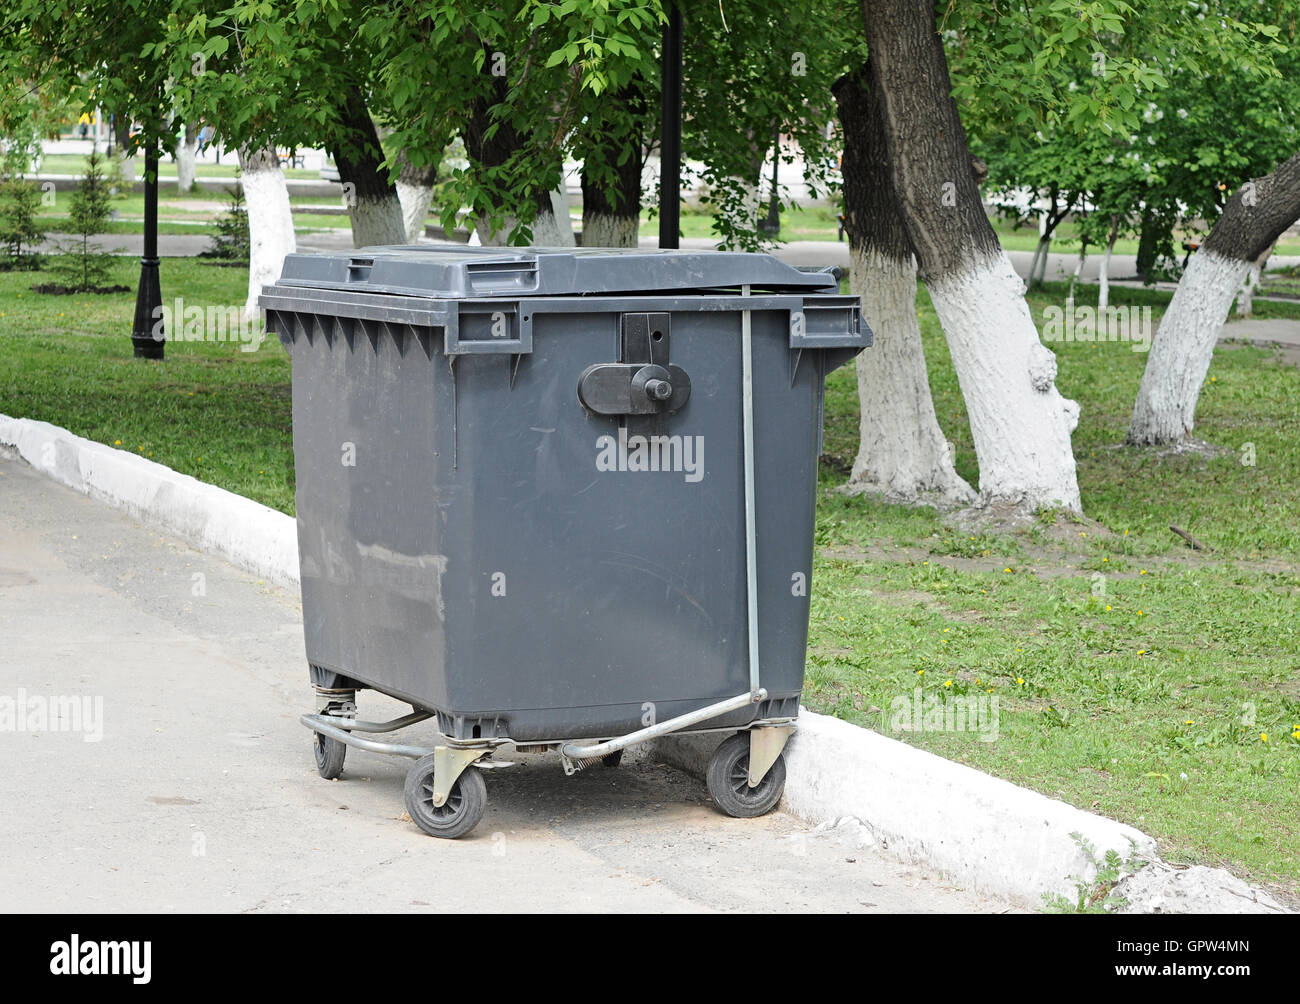 https://c8.alamy.com/comp/GPW4MN/garbage-can-on-the-side-of-the-road-GPW4MN.jpg